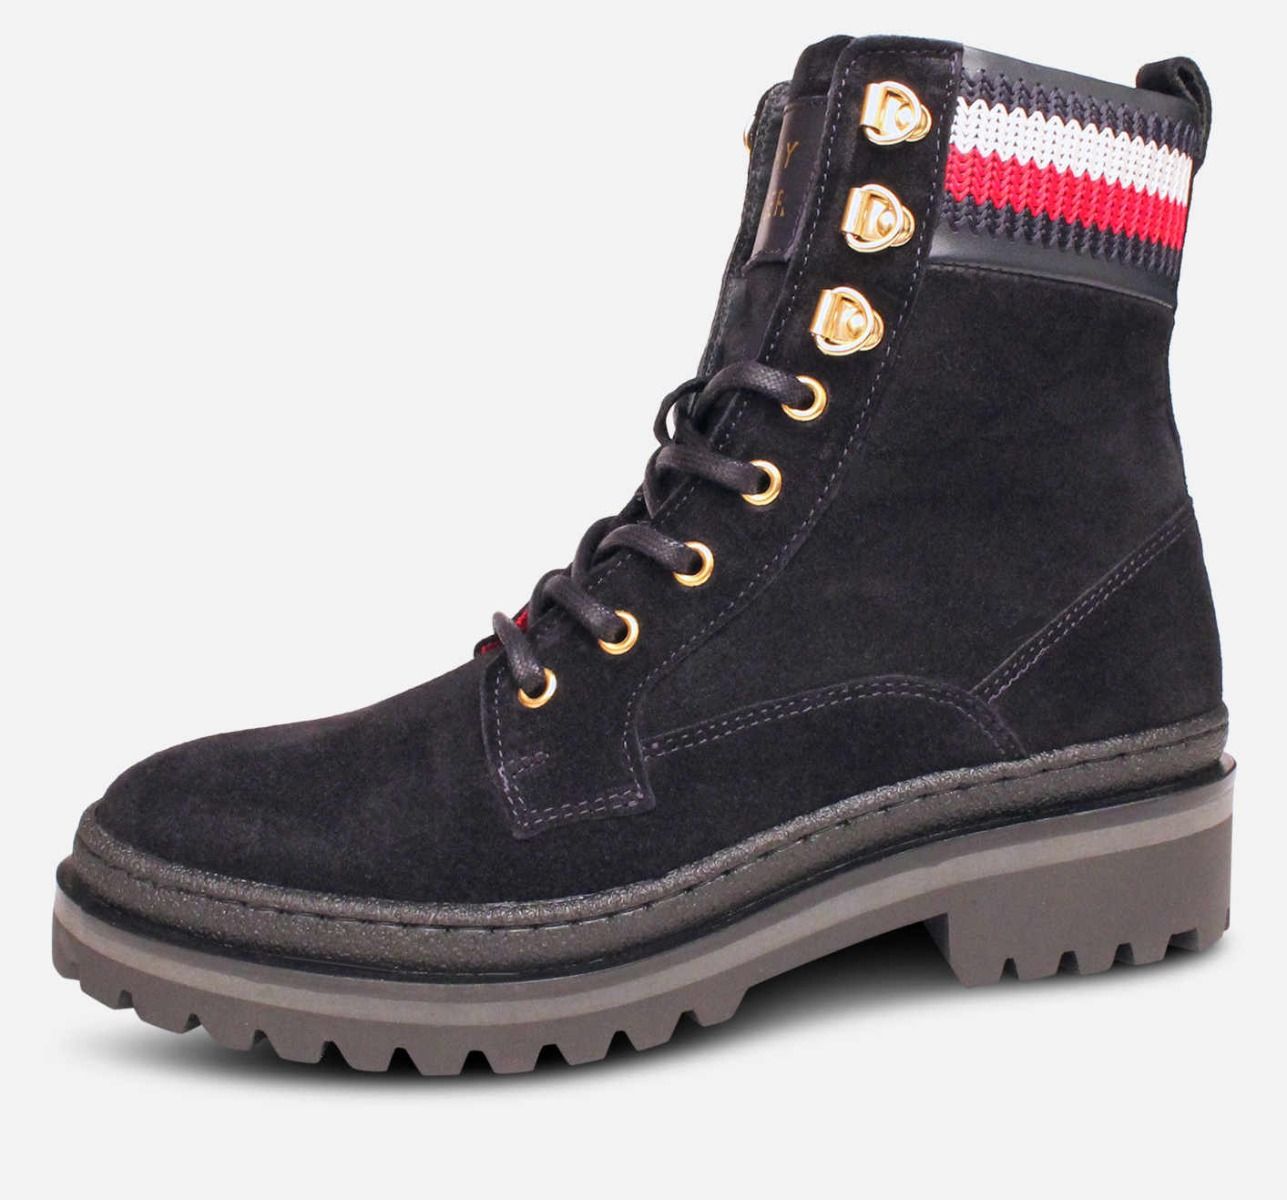 Tommy Hilfiger Dark Navy Blue Suede Boots Lace Up